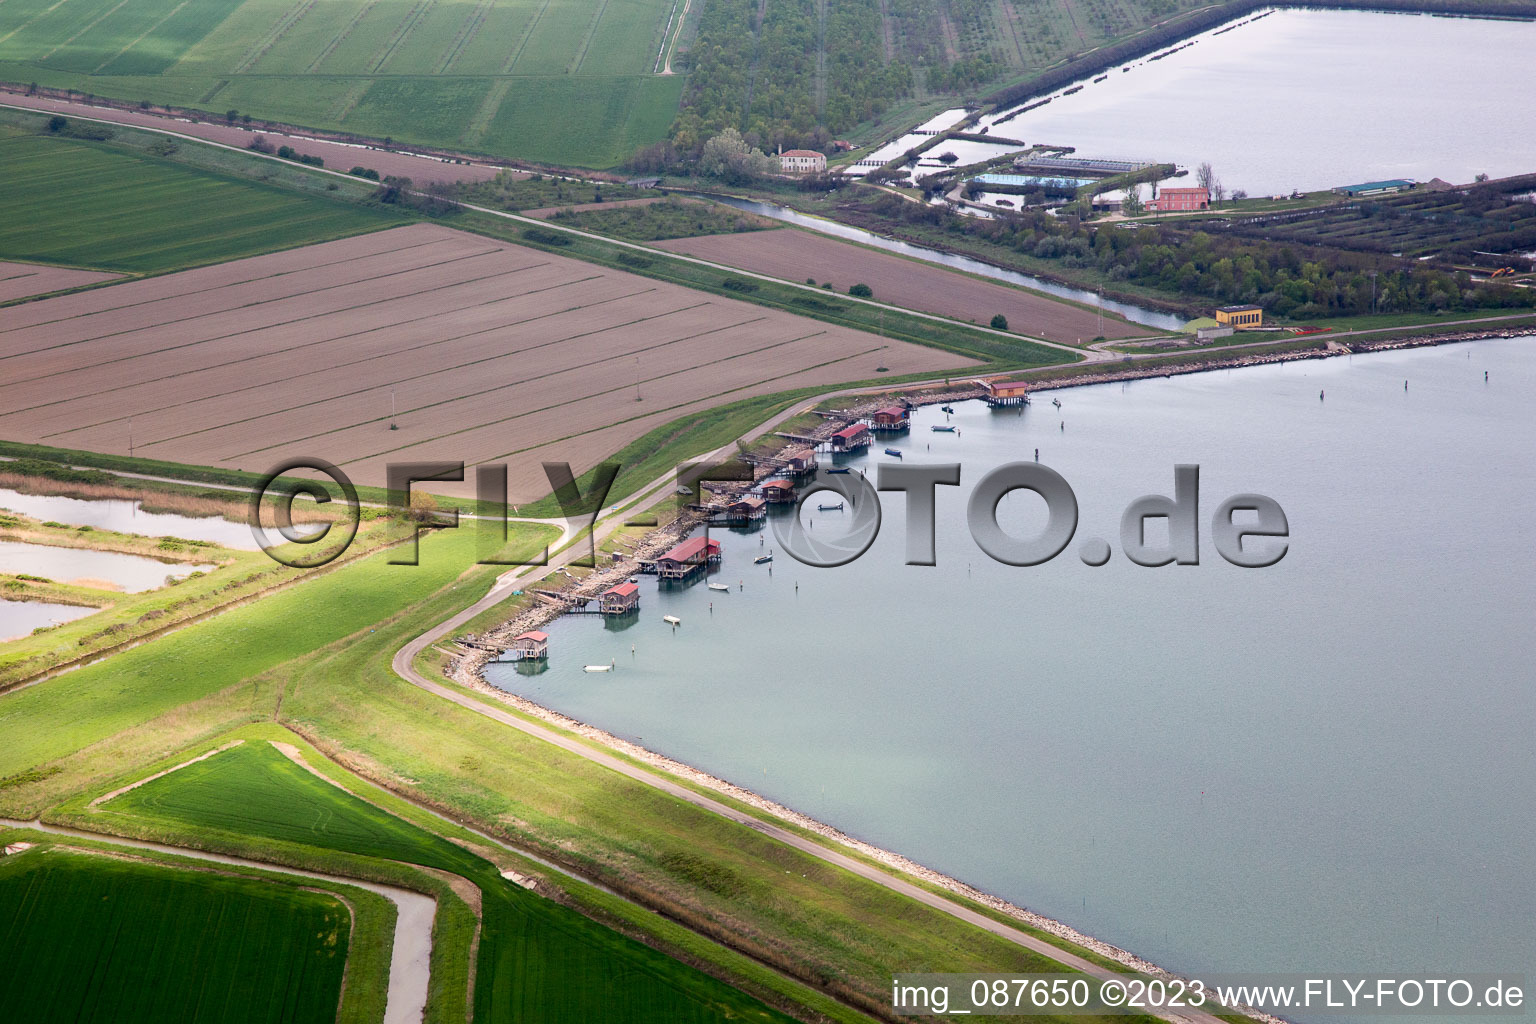 Aerial view of Porto Tolle in the state Veneto, Italy